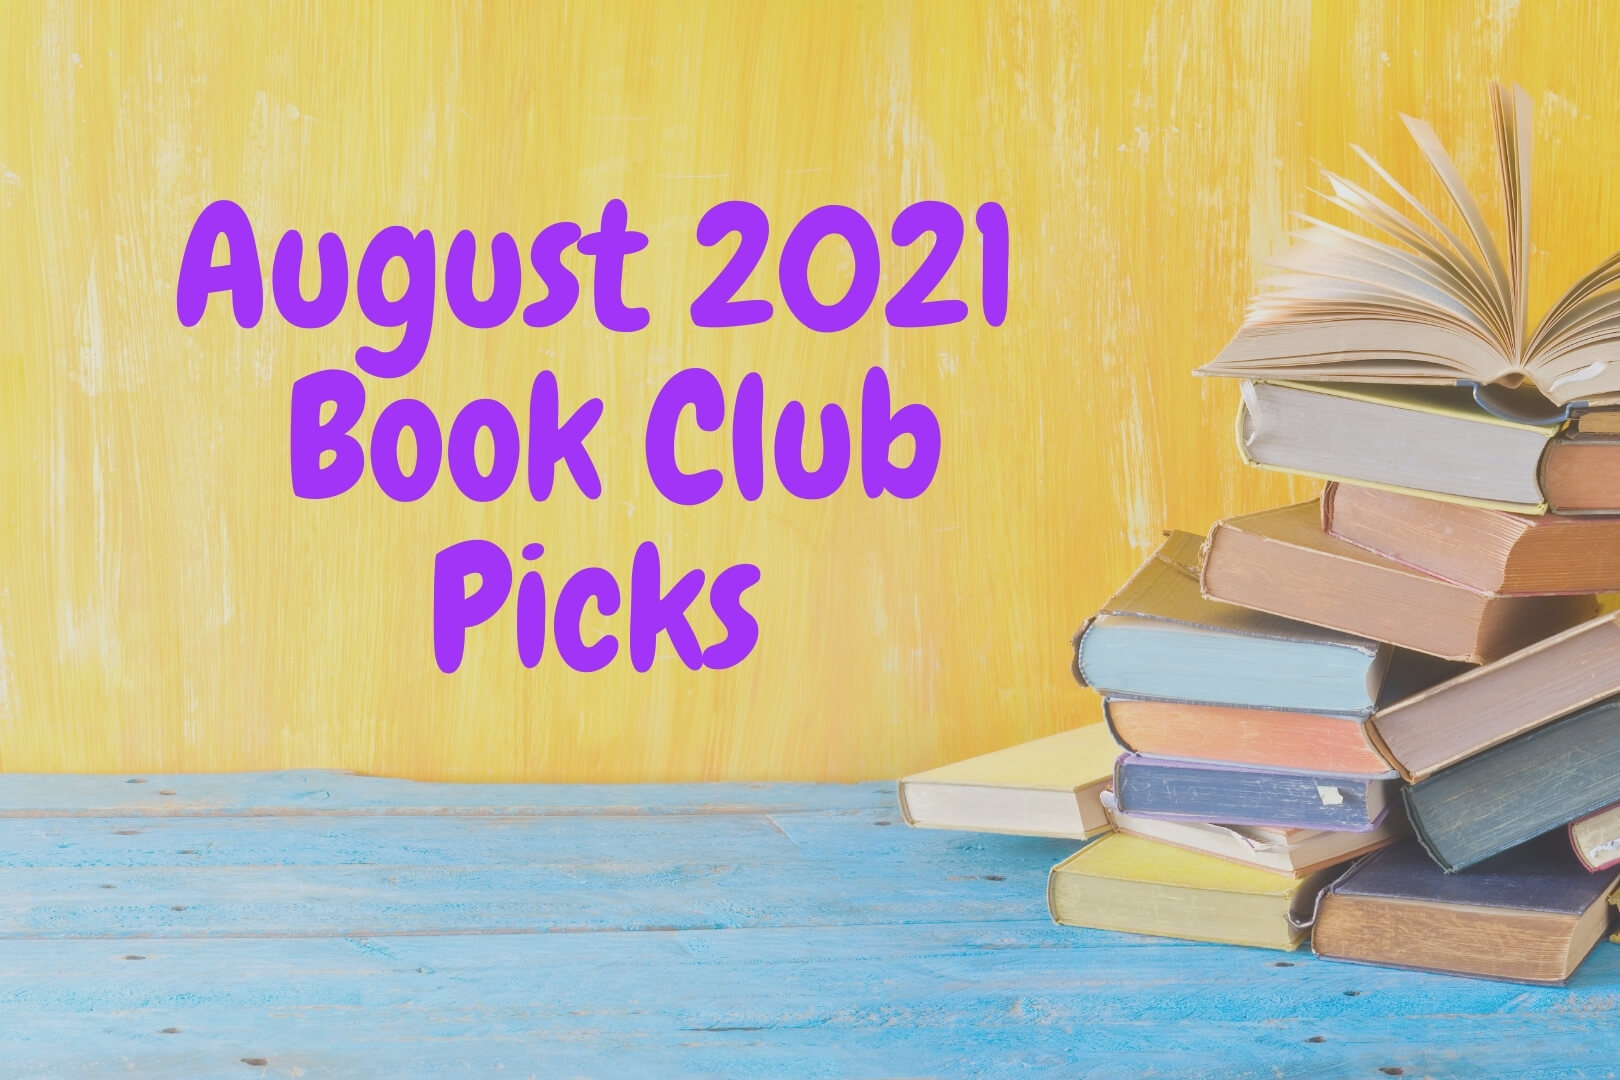 Book Club Picks for August 2021